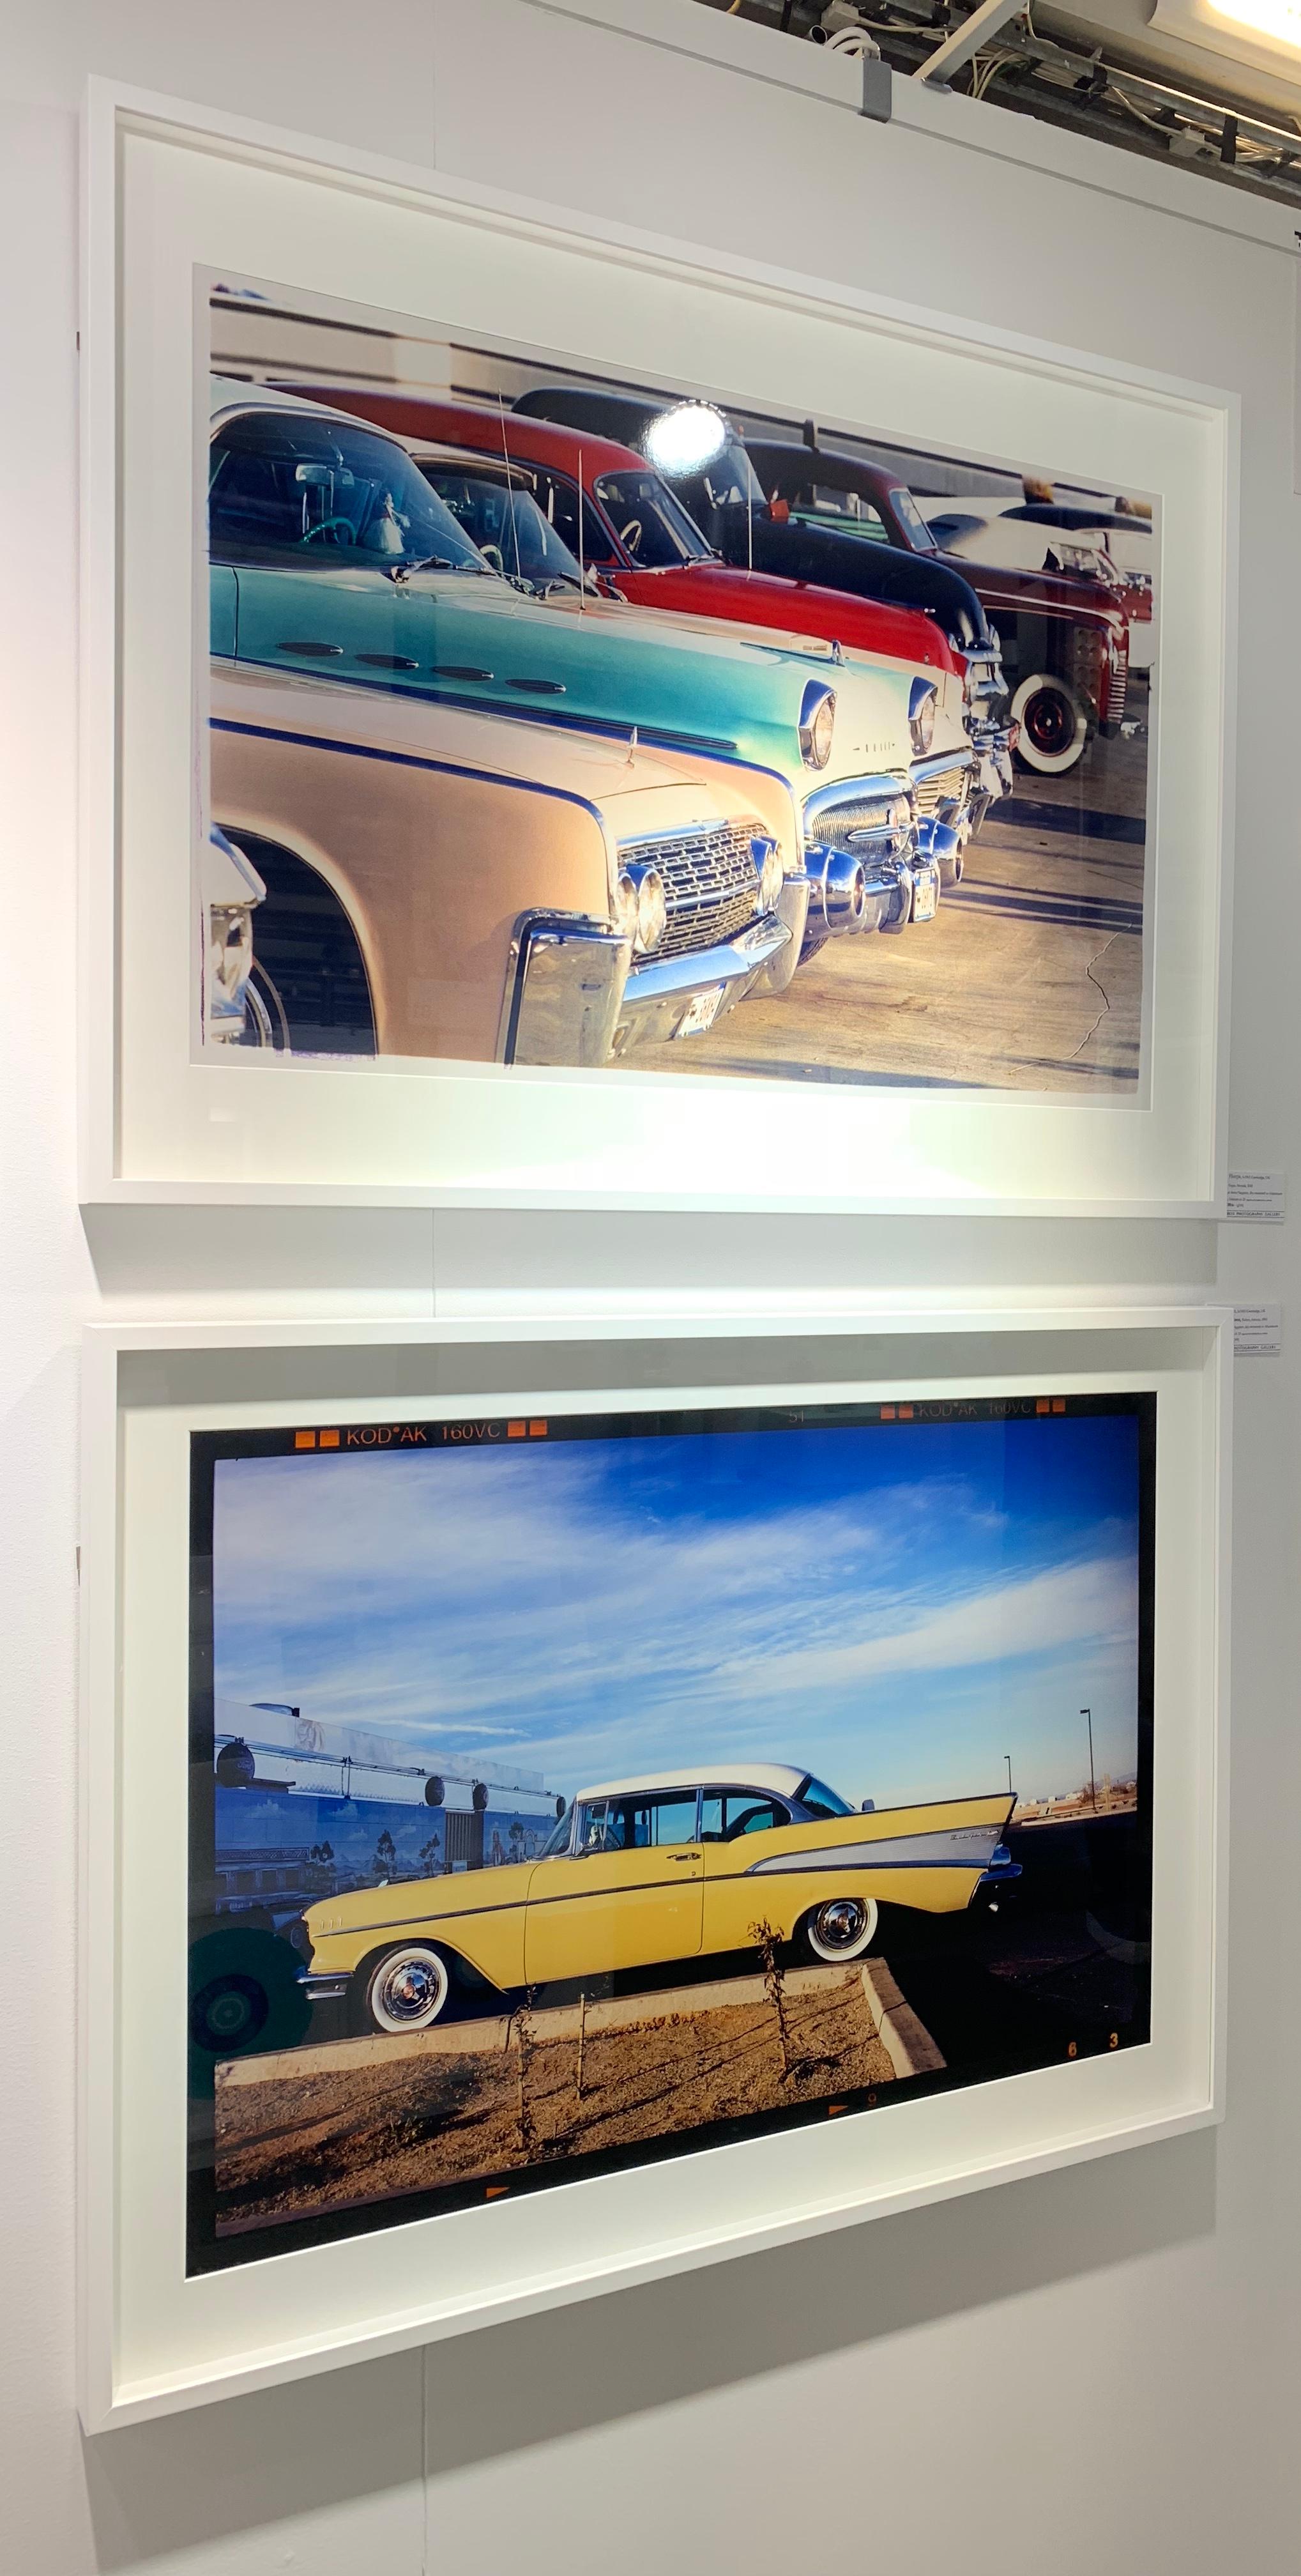 'Cars', photograph from Richard Heeps 'Man's Ruin' Series, featuring vintage classic American cars in the Las Vegas evening sun, with delicious pastel colours.

This artwork is a limited edition of 25, gloss photographic print. Accompanied by a